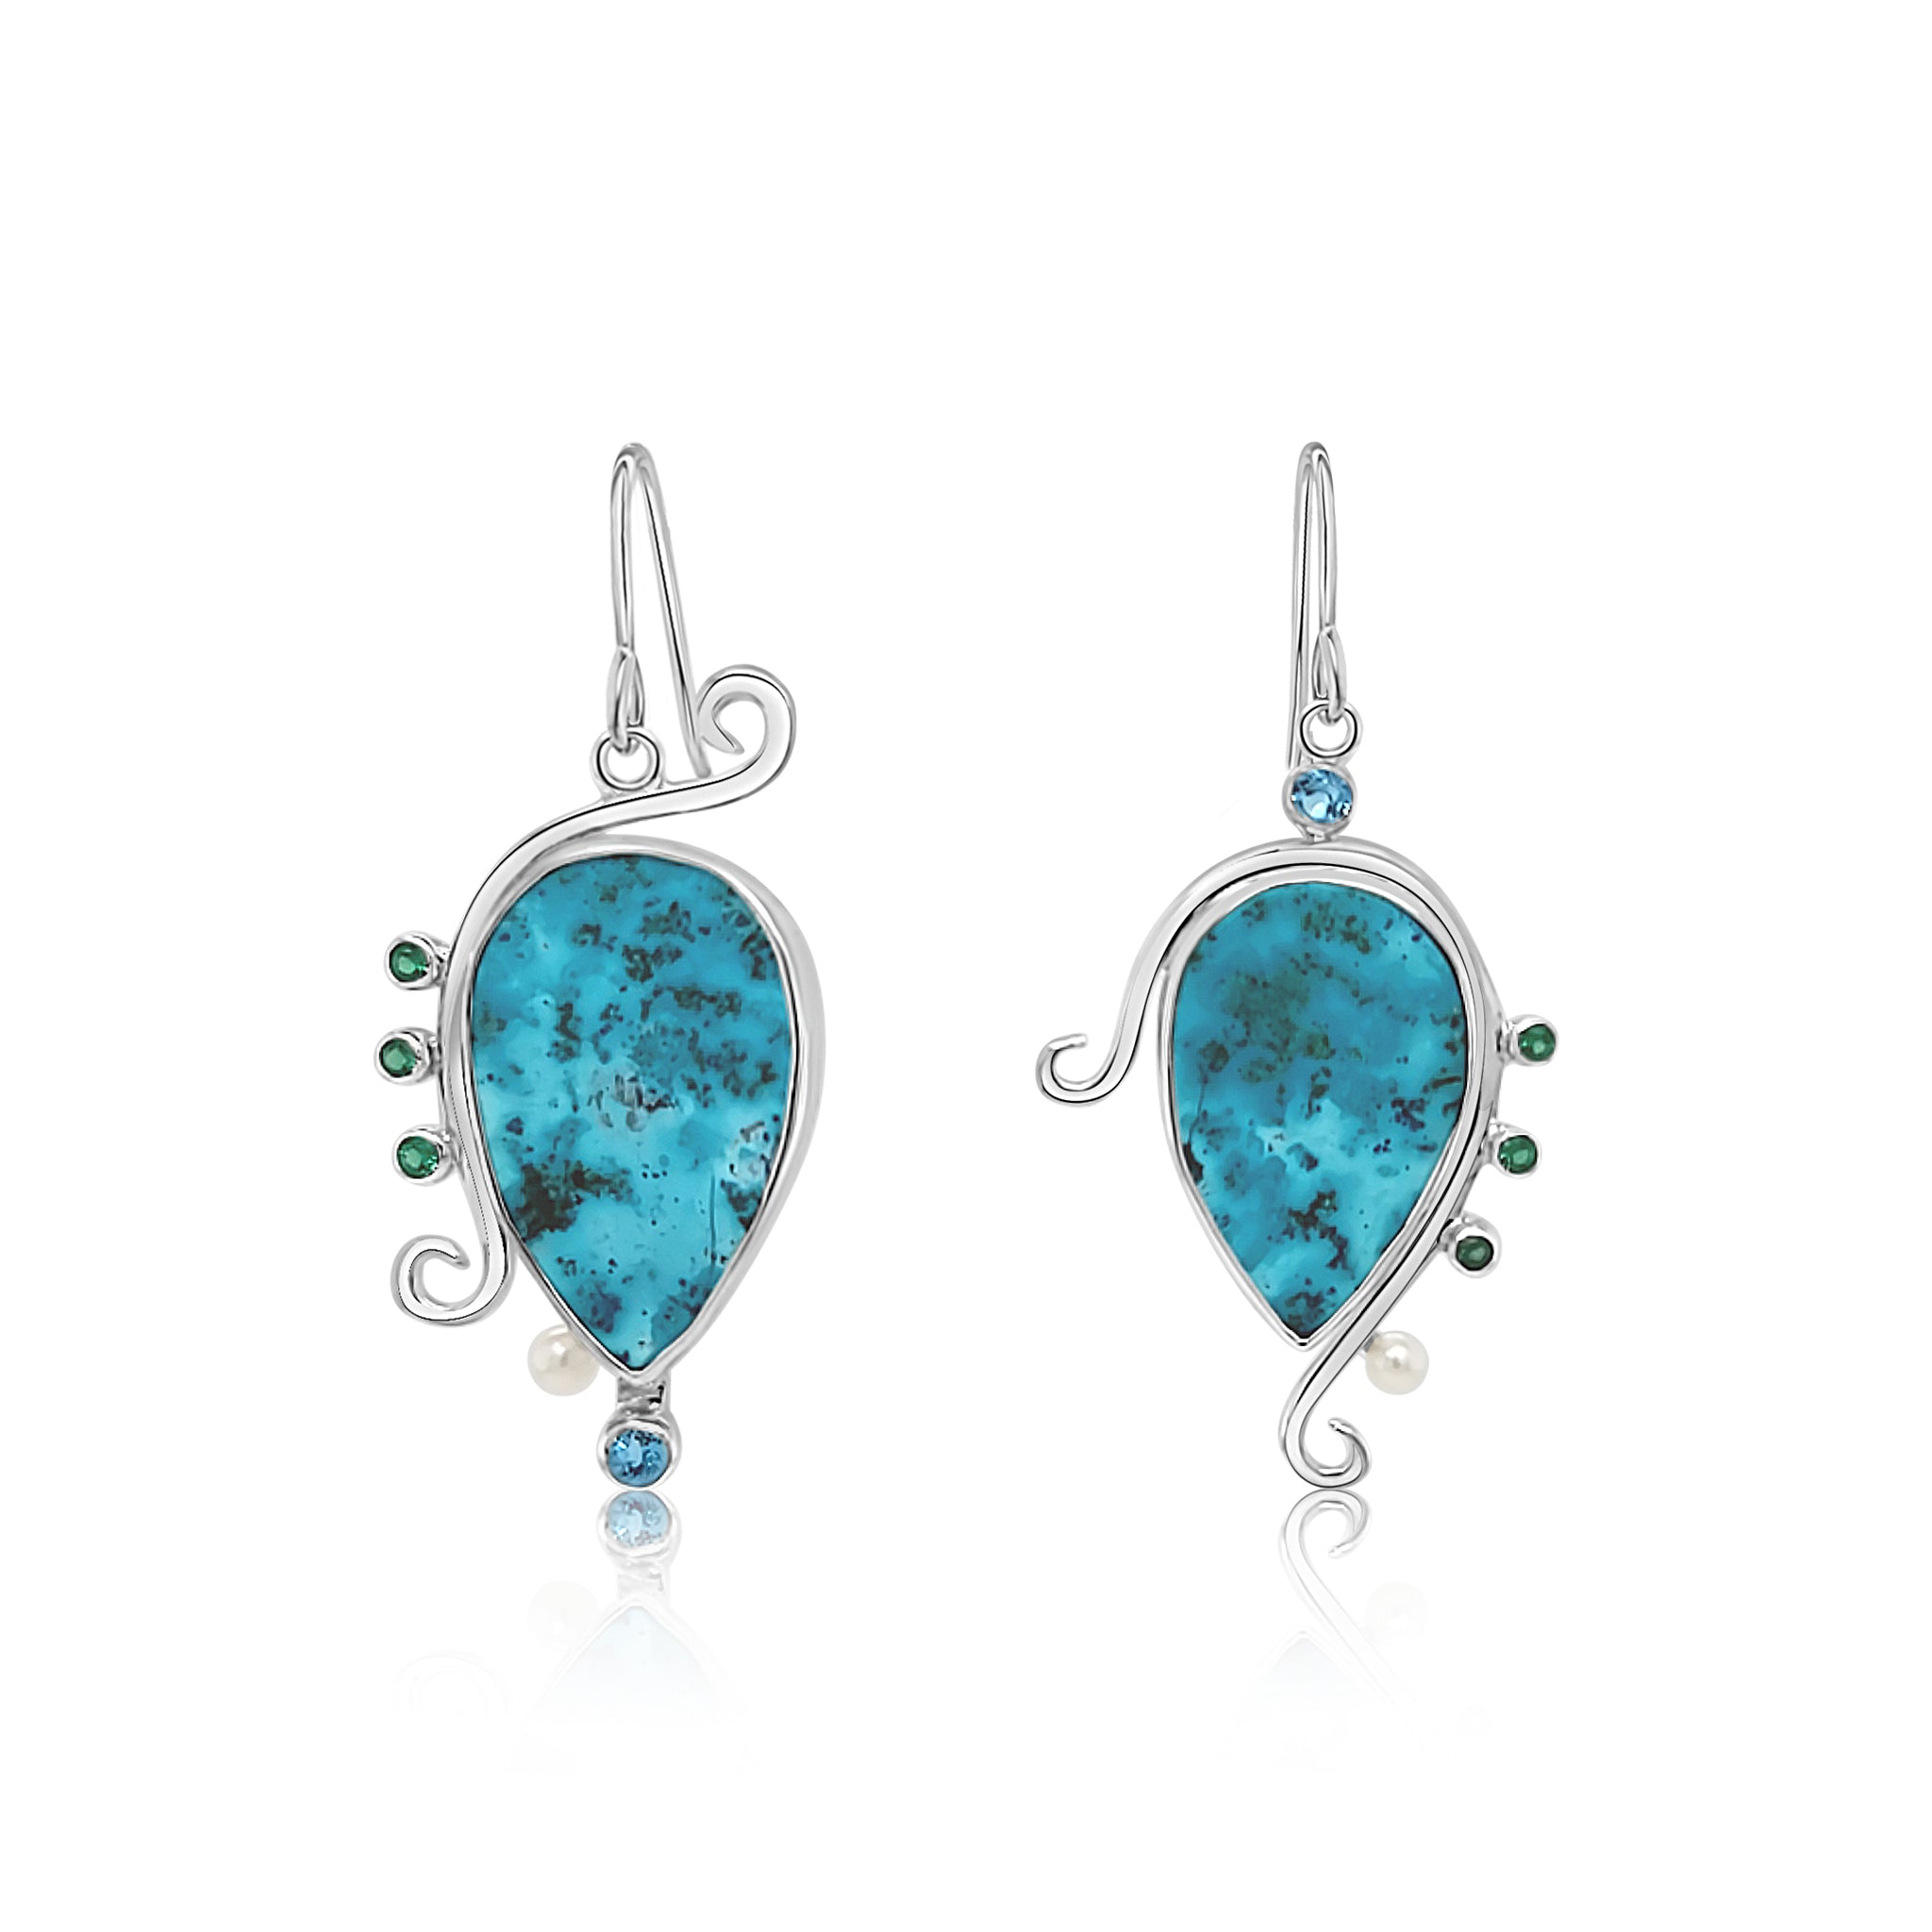 Asymmetric Chrysocolla Shattuckite, Nano Green Spinel, Blue Topaz and Freshwater Pearls set in Sterling Silver.